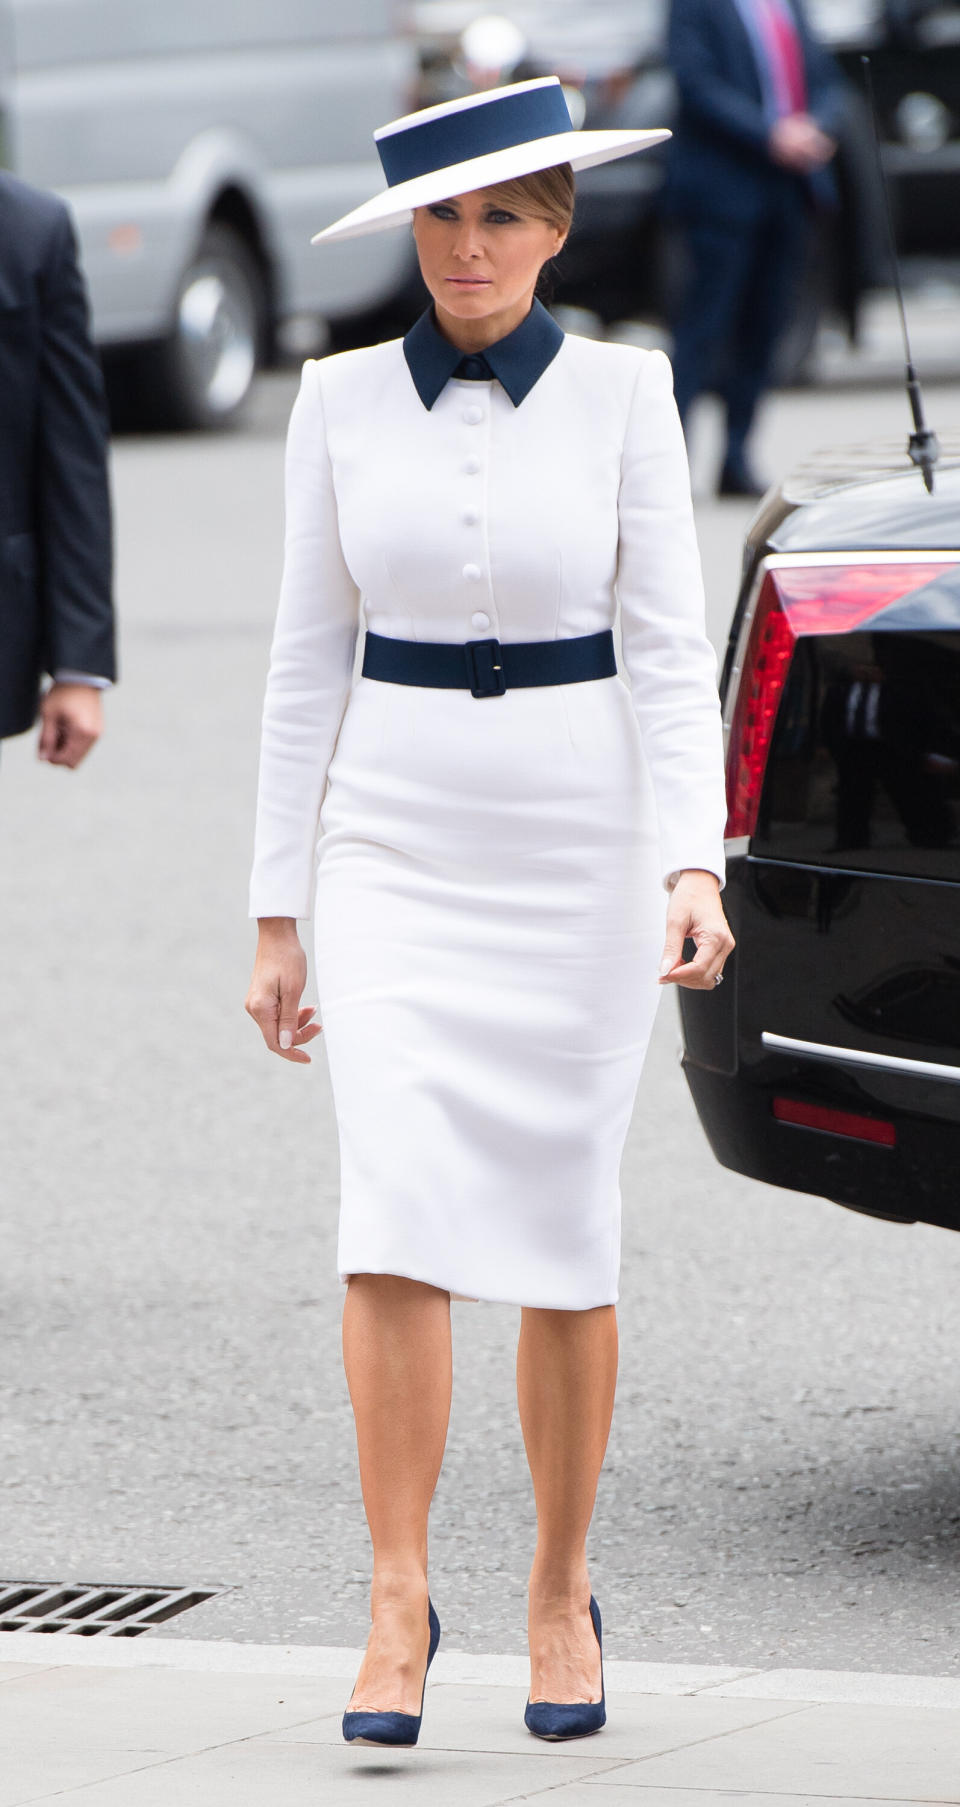 LONDON, ENGLAND - JUNE 03: First Lady Melania Trump arrives for a visit to Westminster Abbey on June 03, 2019 in London, England. President Trump's three-day state visit will include lunch with the Queen, and a State Banquet at Buckingham Palace, as well as business meetings with the Prime Minister and the Duke of York, before travelling to Portsmouth to mark the 75th anniversary of the D-Day landings.  (Photo by Samir Hussein/Samir Hussein/WireImage)